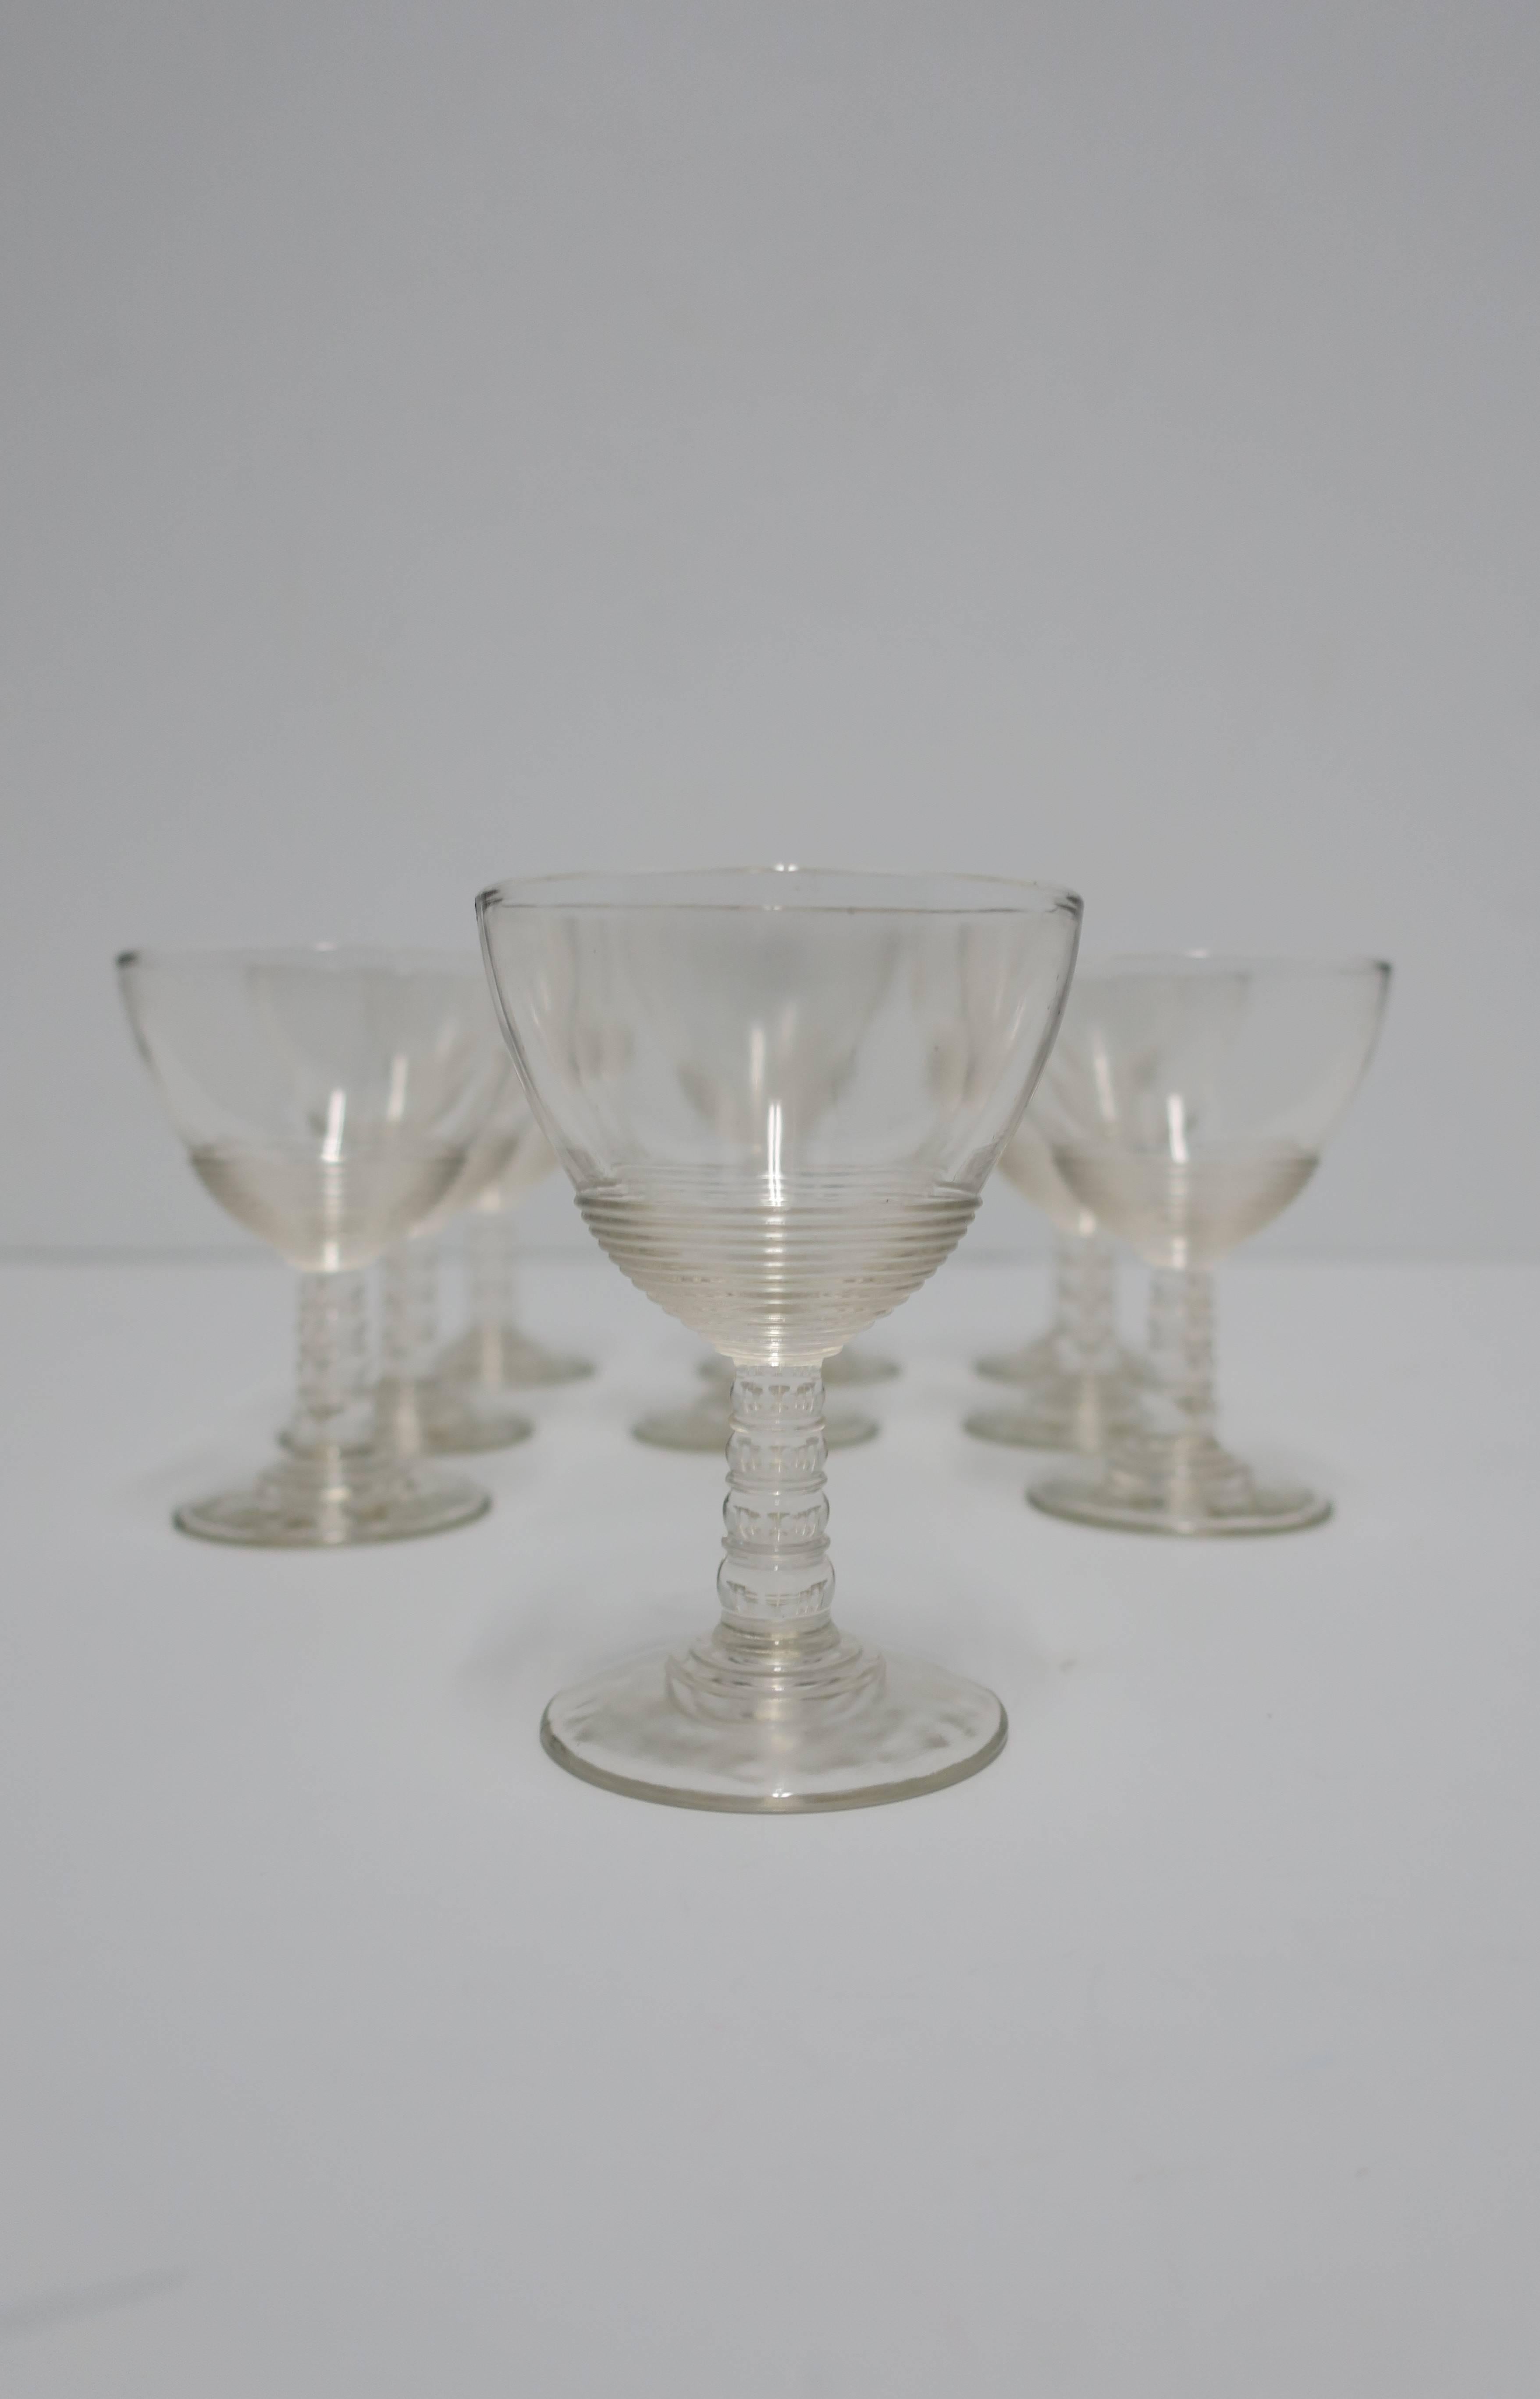 A set of nine (9) Modern clear glassware set with ribbed detailing and ball stem, circa 1920s. Great for any beverage including Champagne, wine, spirit, etc. Each measure 4